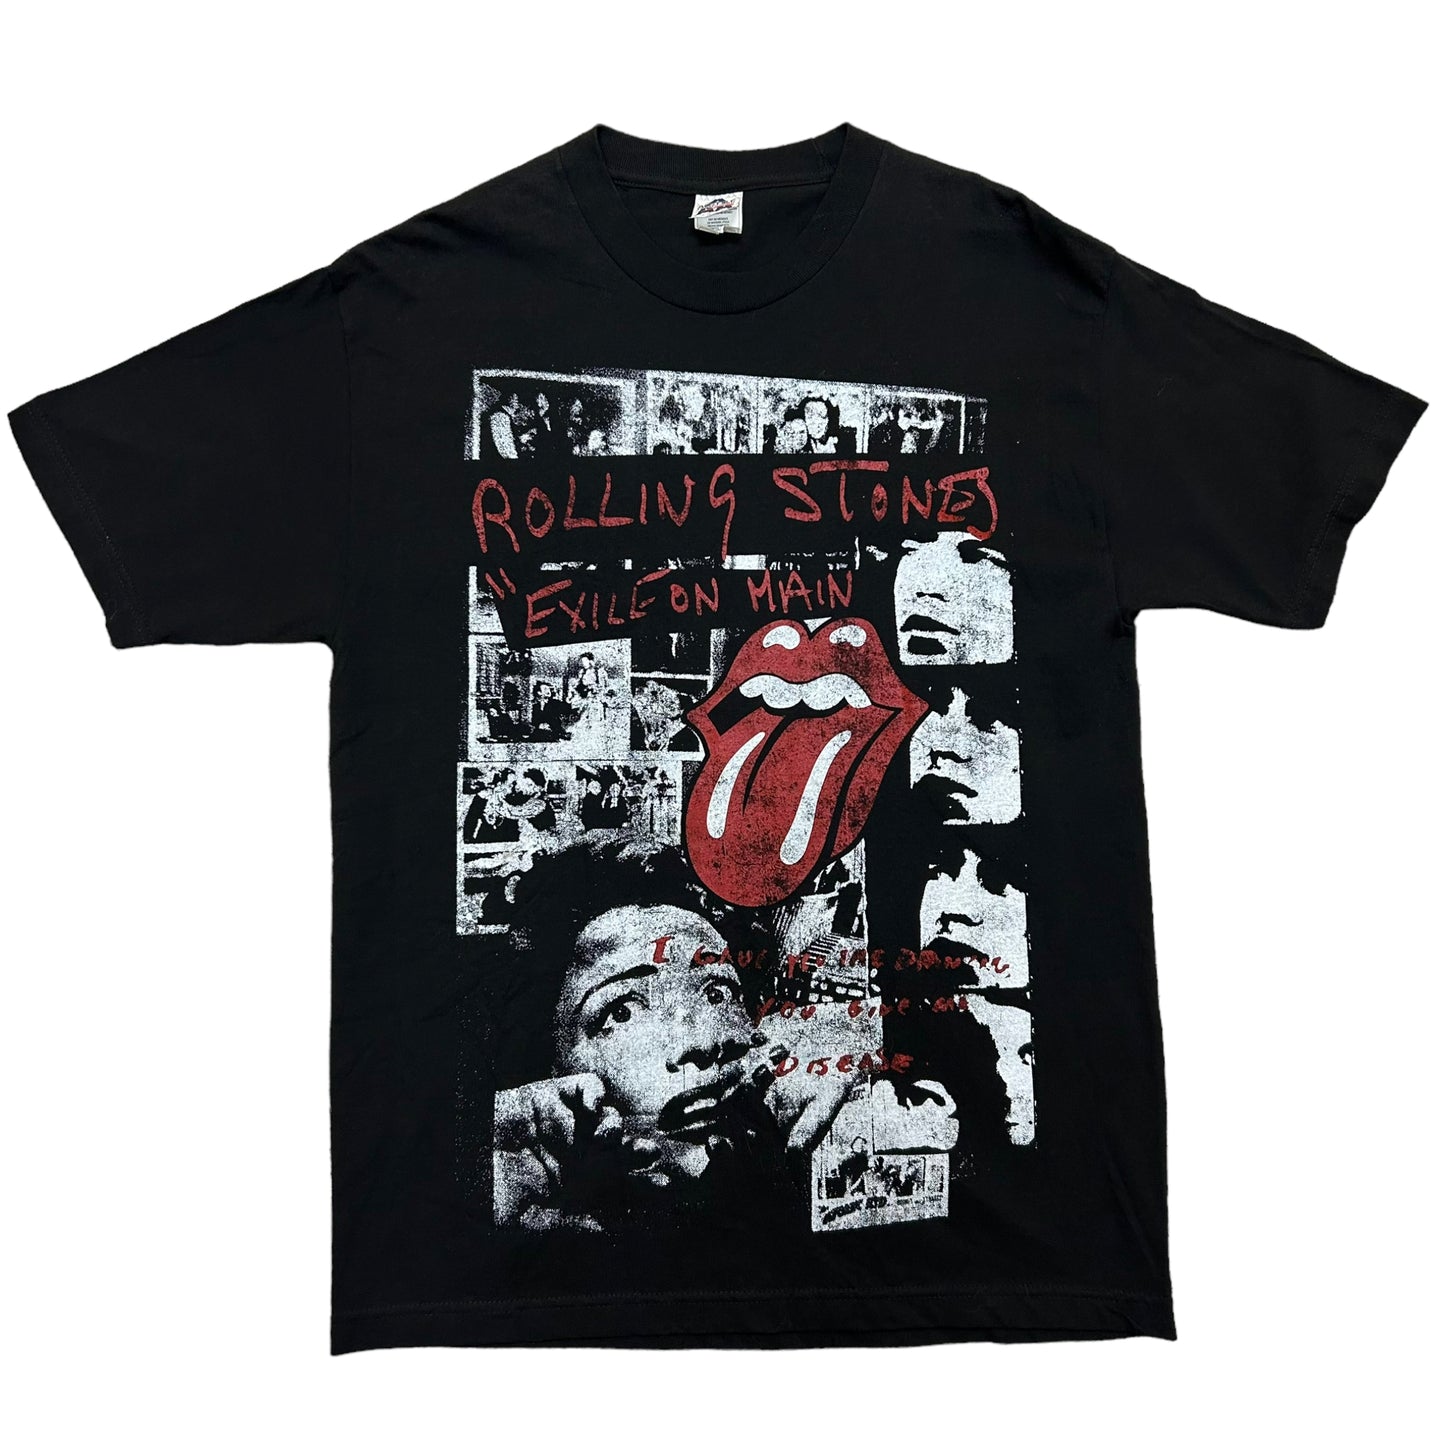 Y2K The Rolling Stones “Exile On Main” Black Graphic Band T-Shirt - Size Large